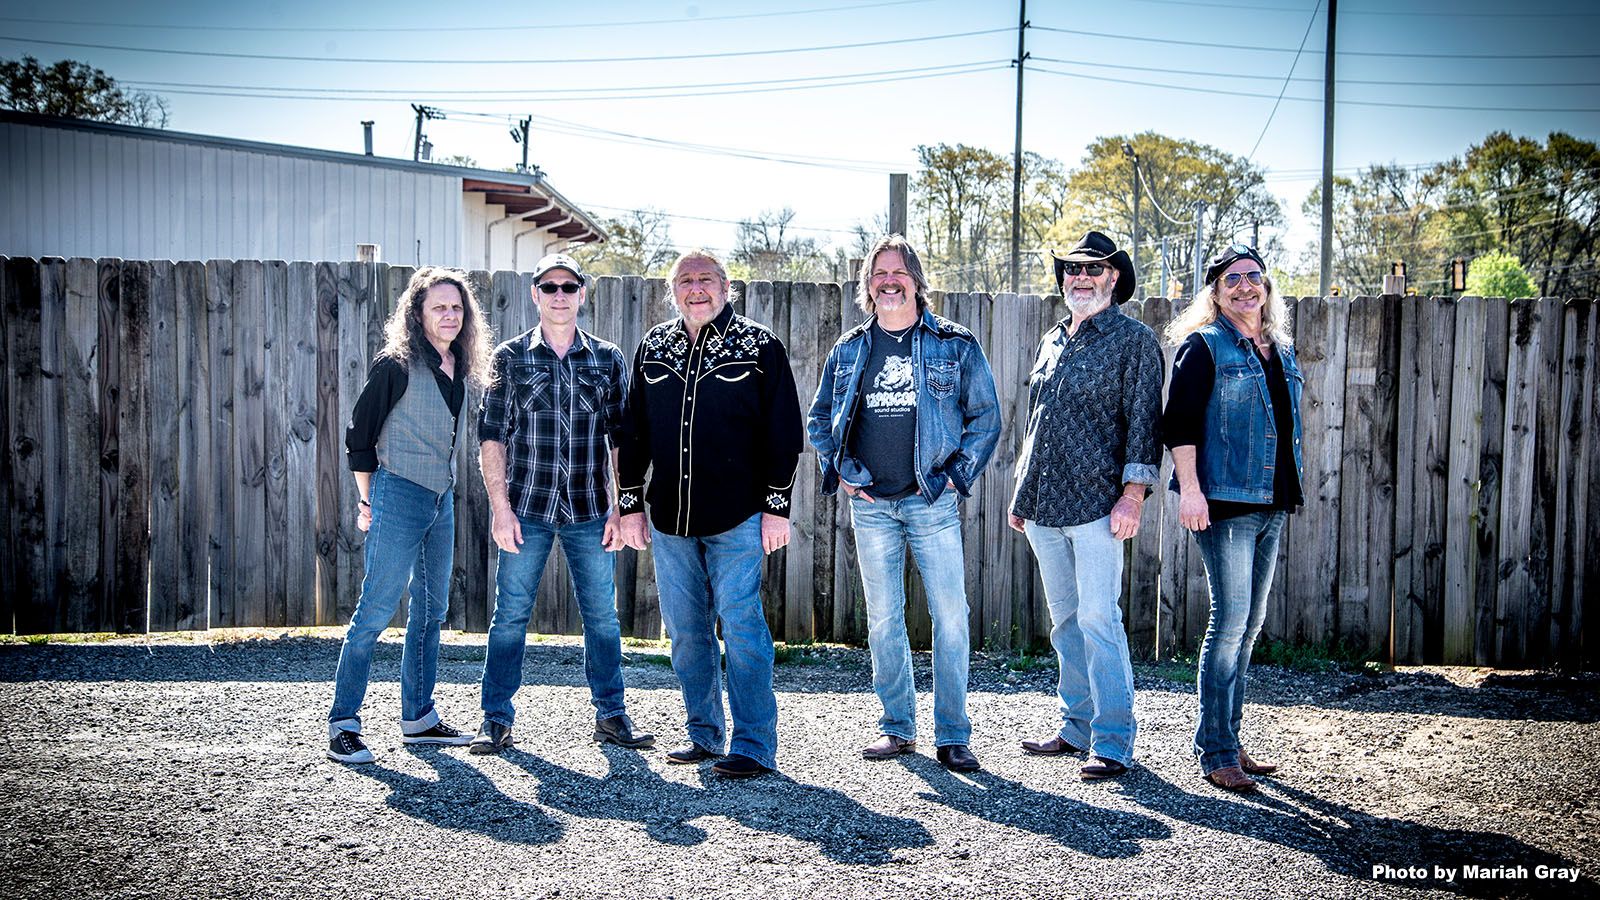 Southern rock veterans The Marshall Tucker Band will be at The Clyde Theatre on Nov. 11.